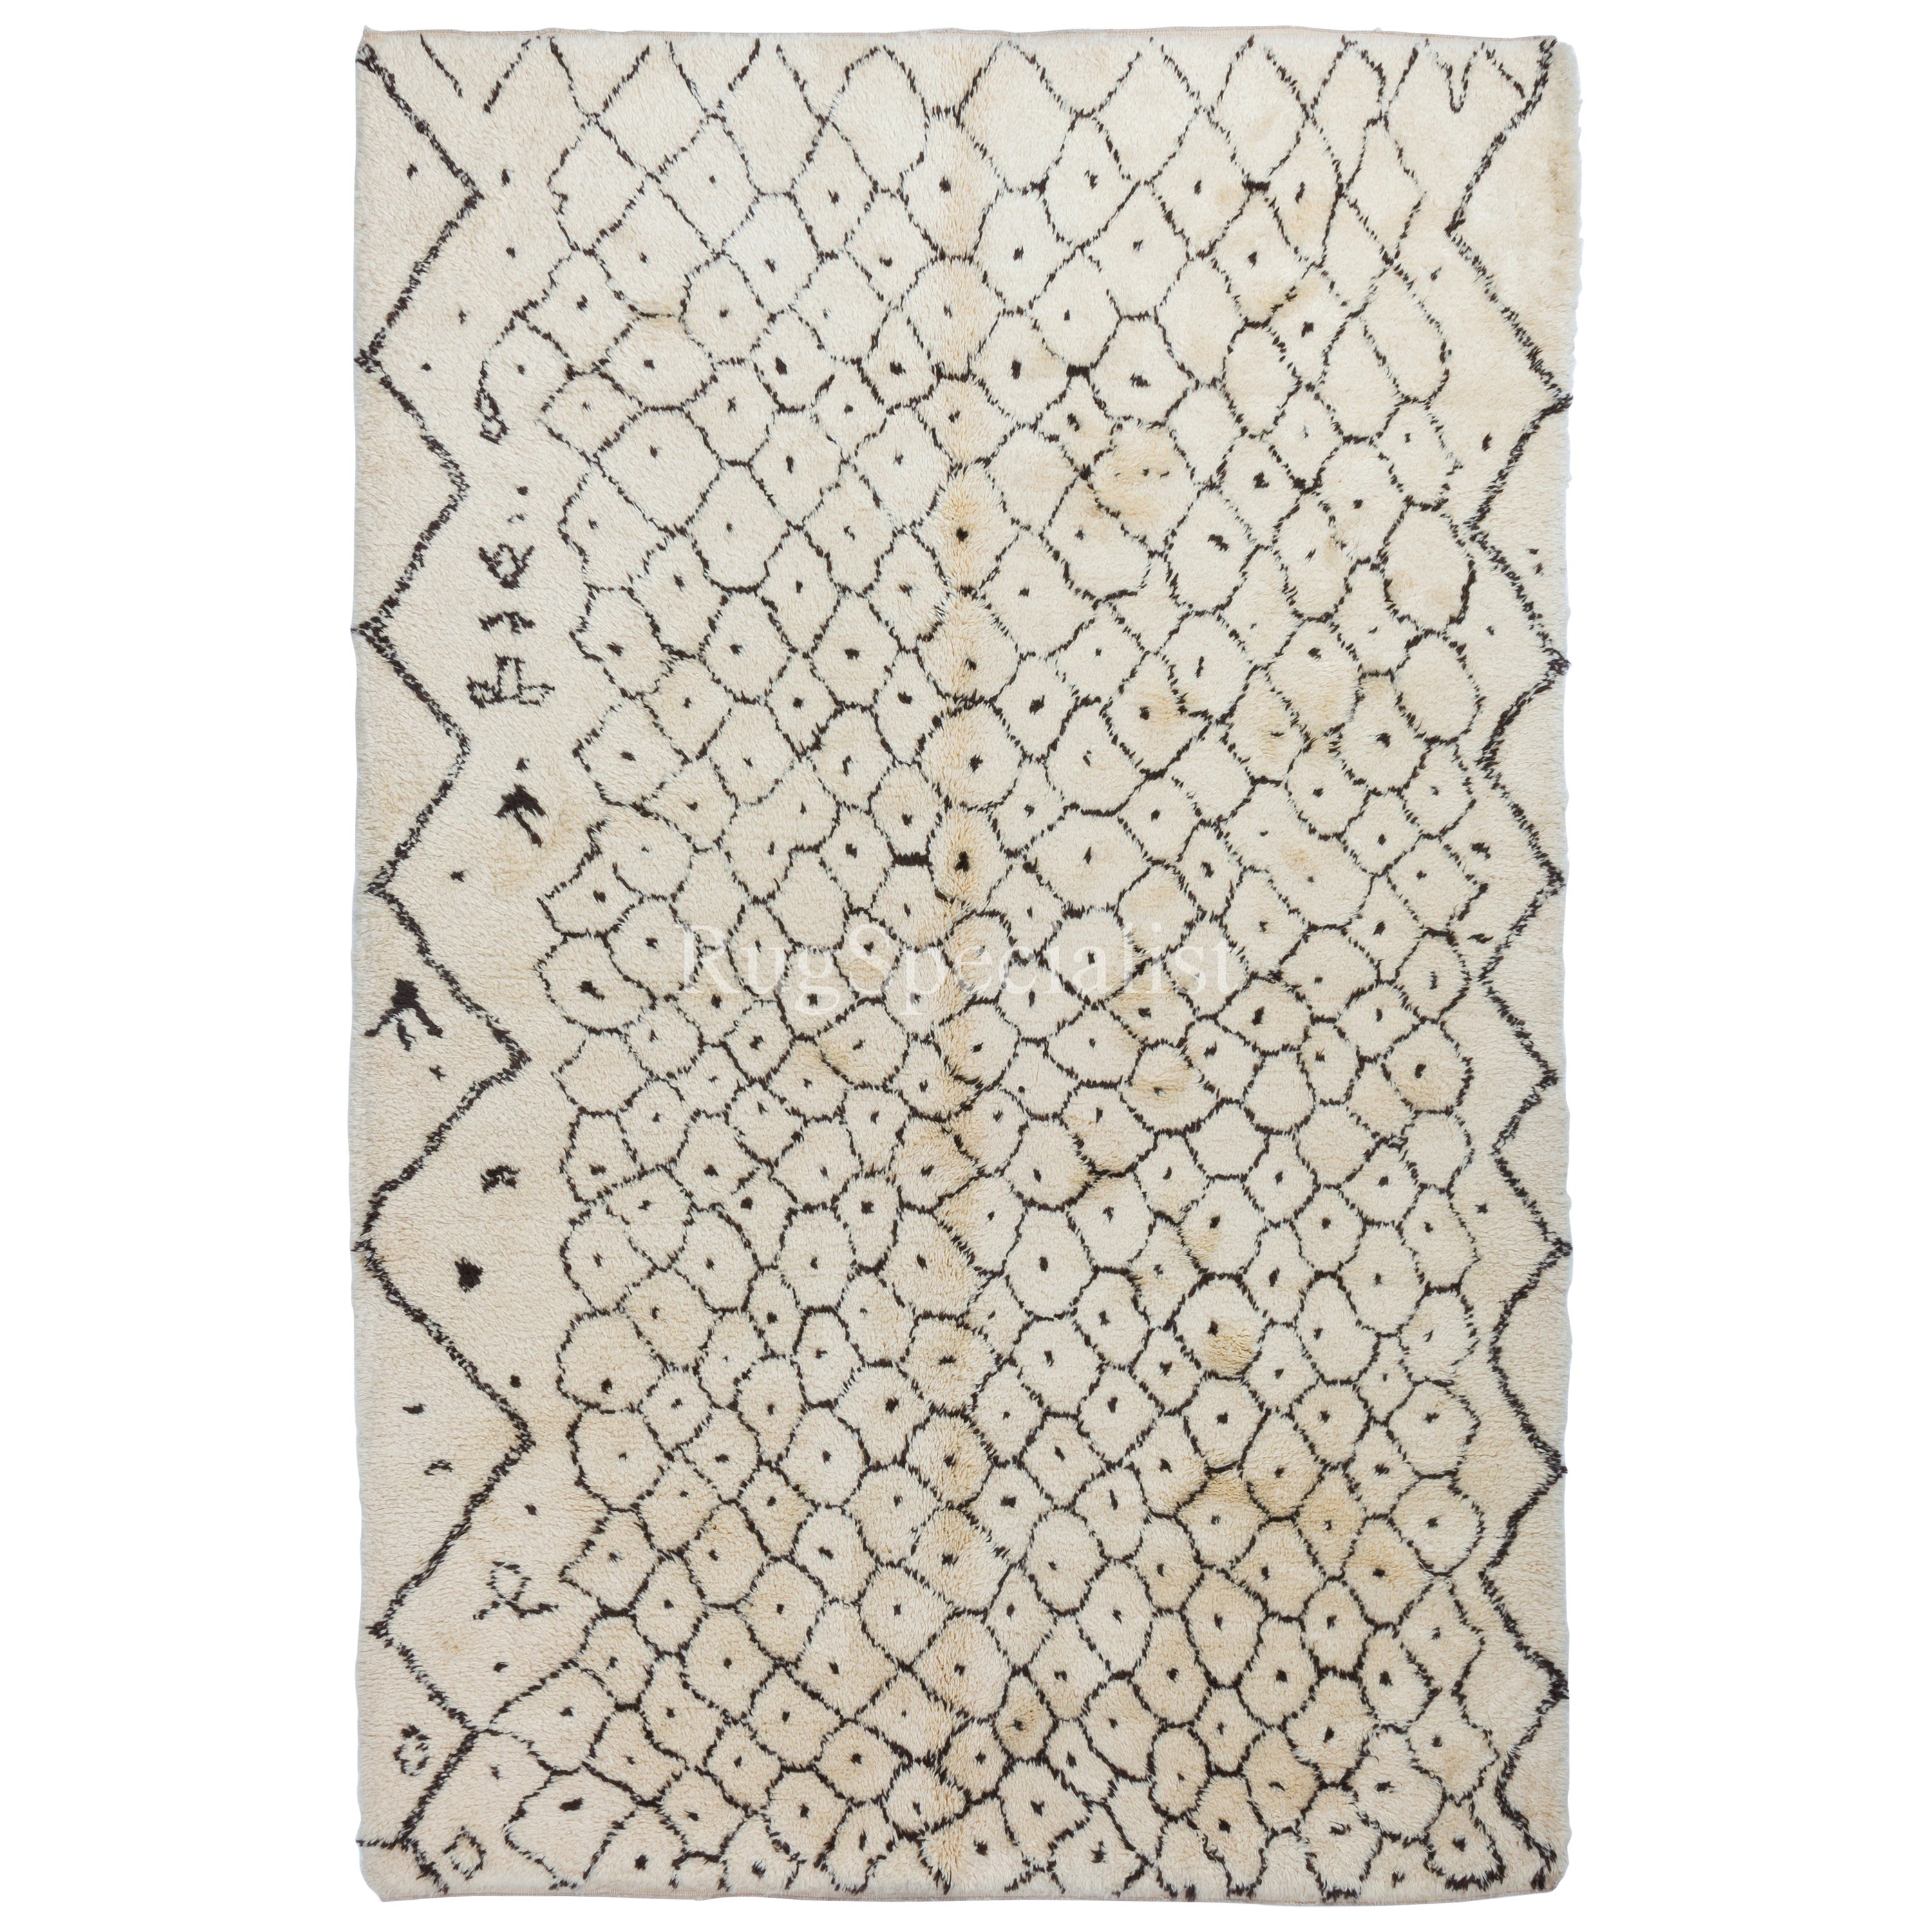 6.6x10.2 Ft Contemporary Moroccan Berber Azilal Style Tulu Rug, All Natural Wool en vente